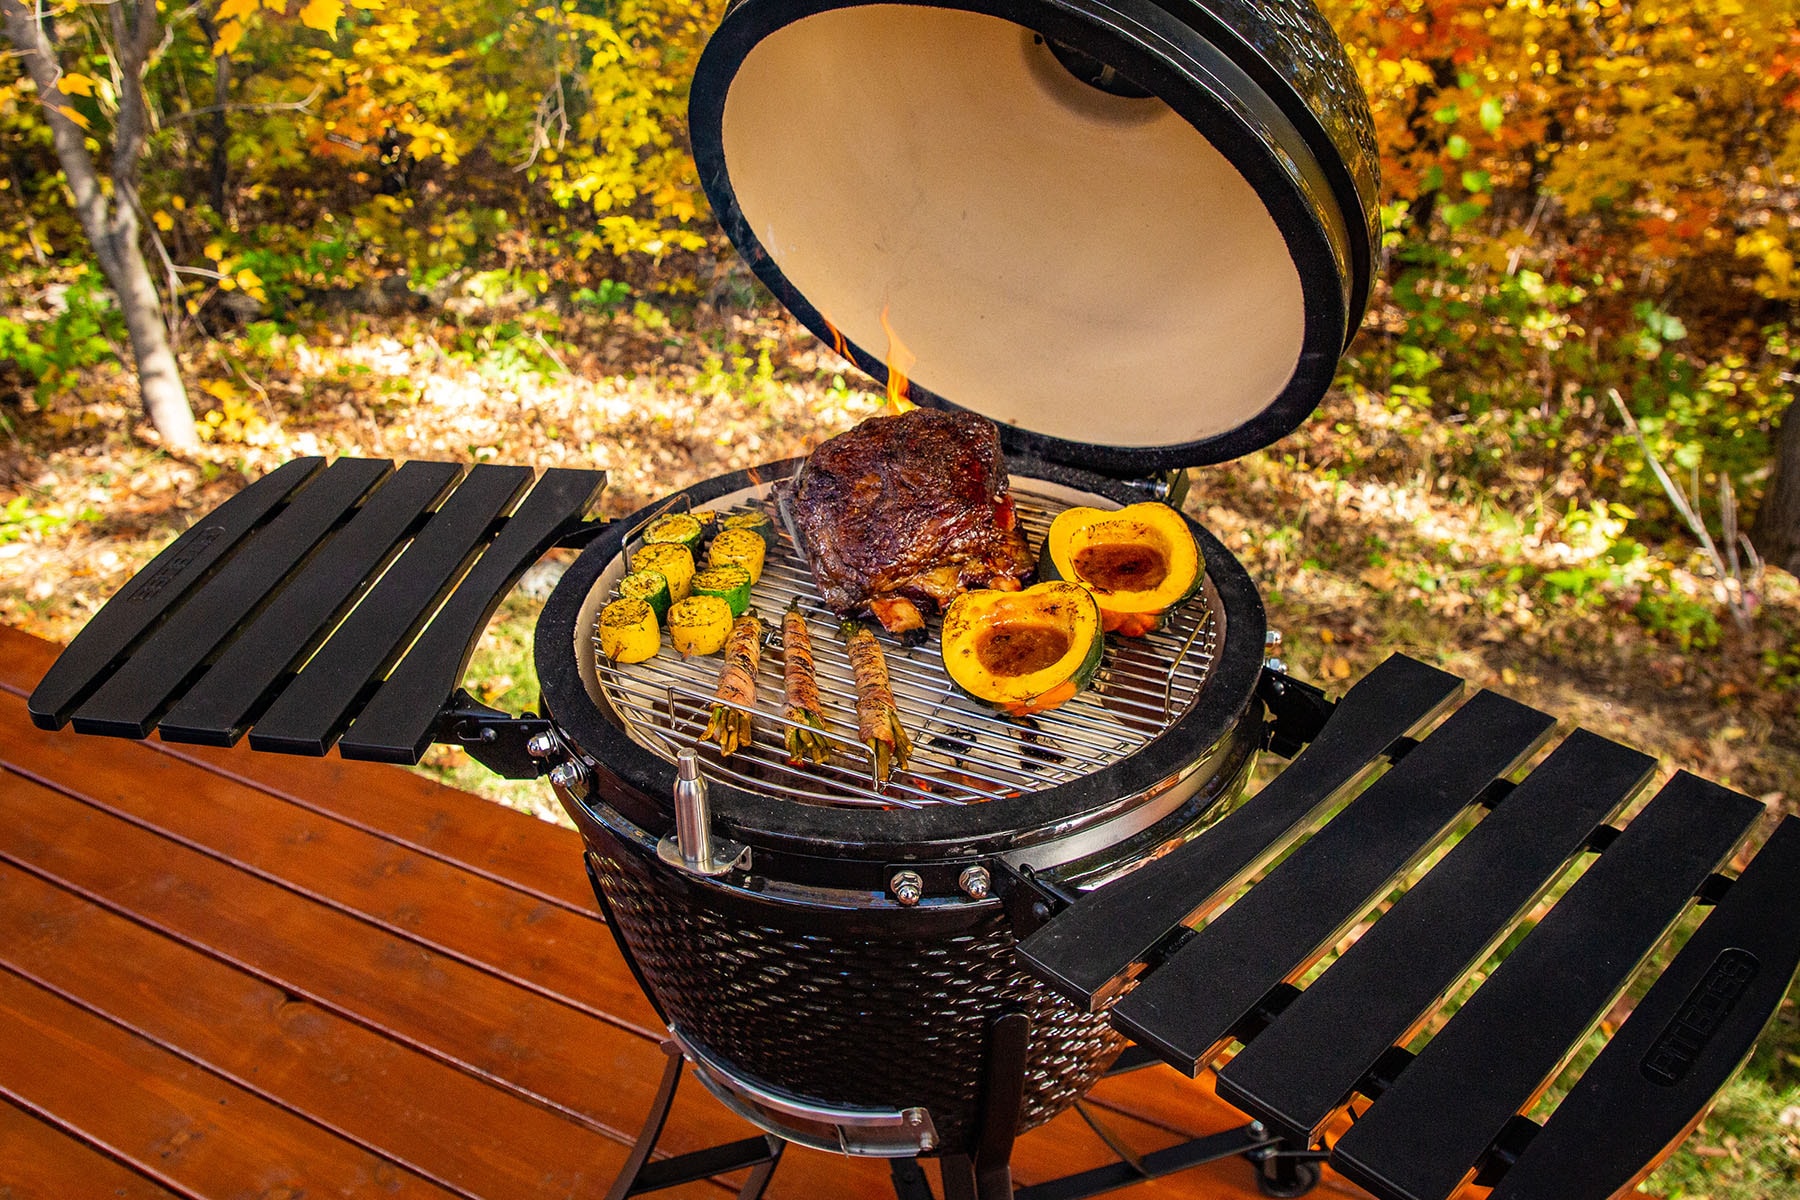 Pit Boss Kamado Grill Review